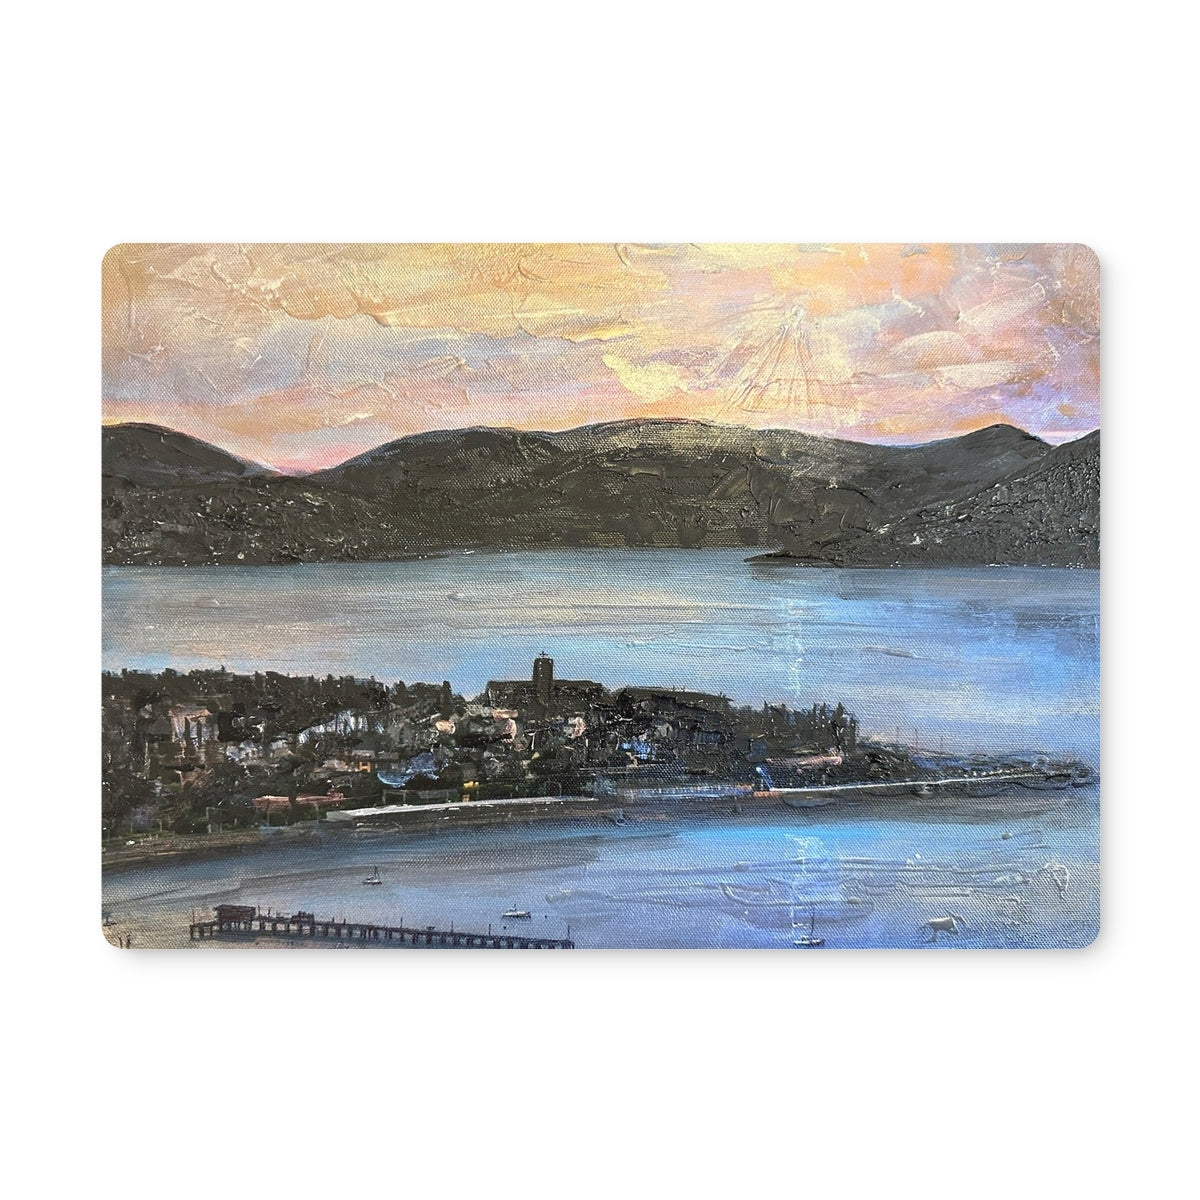 From Lyle Hill Art Gifts Placemat-Placemats-River Clyde Art Gallery-2 Placemats-Paintings, Prints, Homeware, Art Gifts From Scotland By Scottish Artist Kevin Hunter